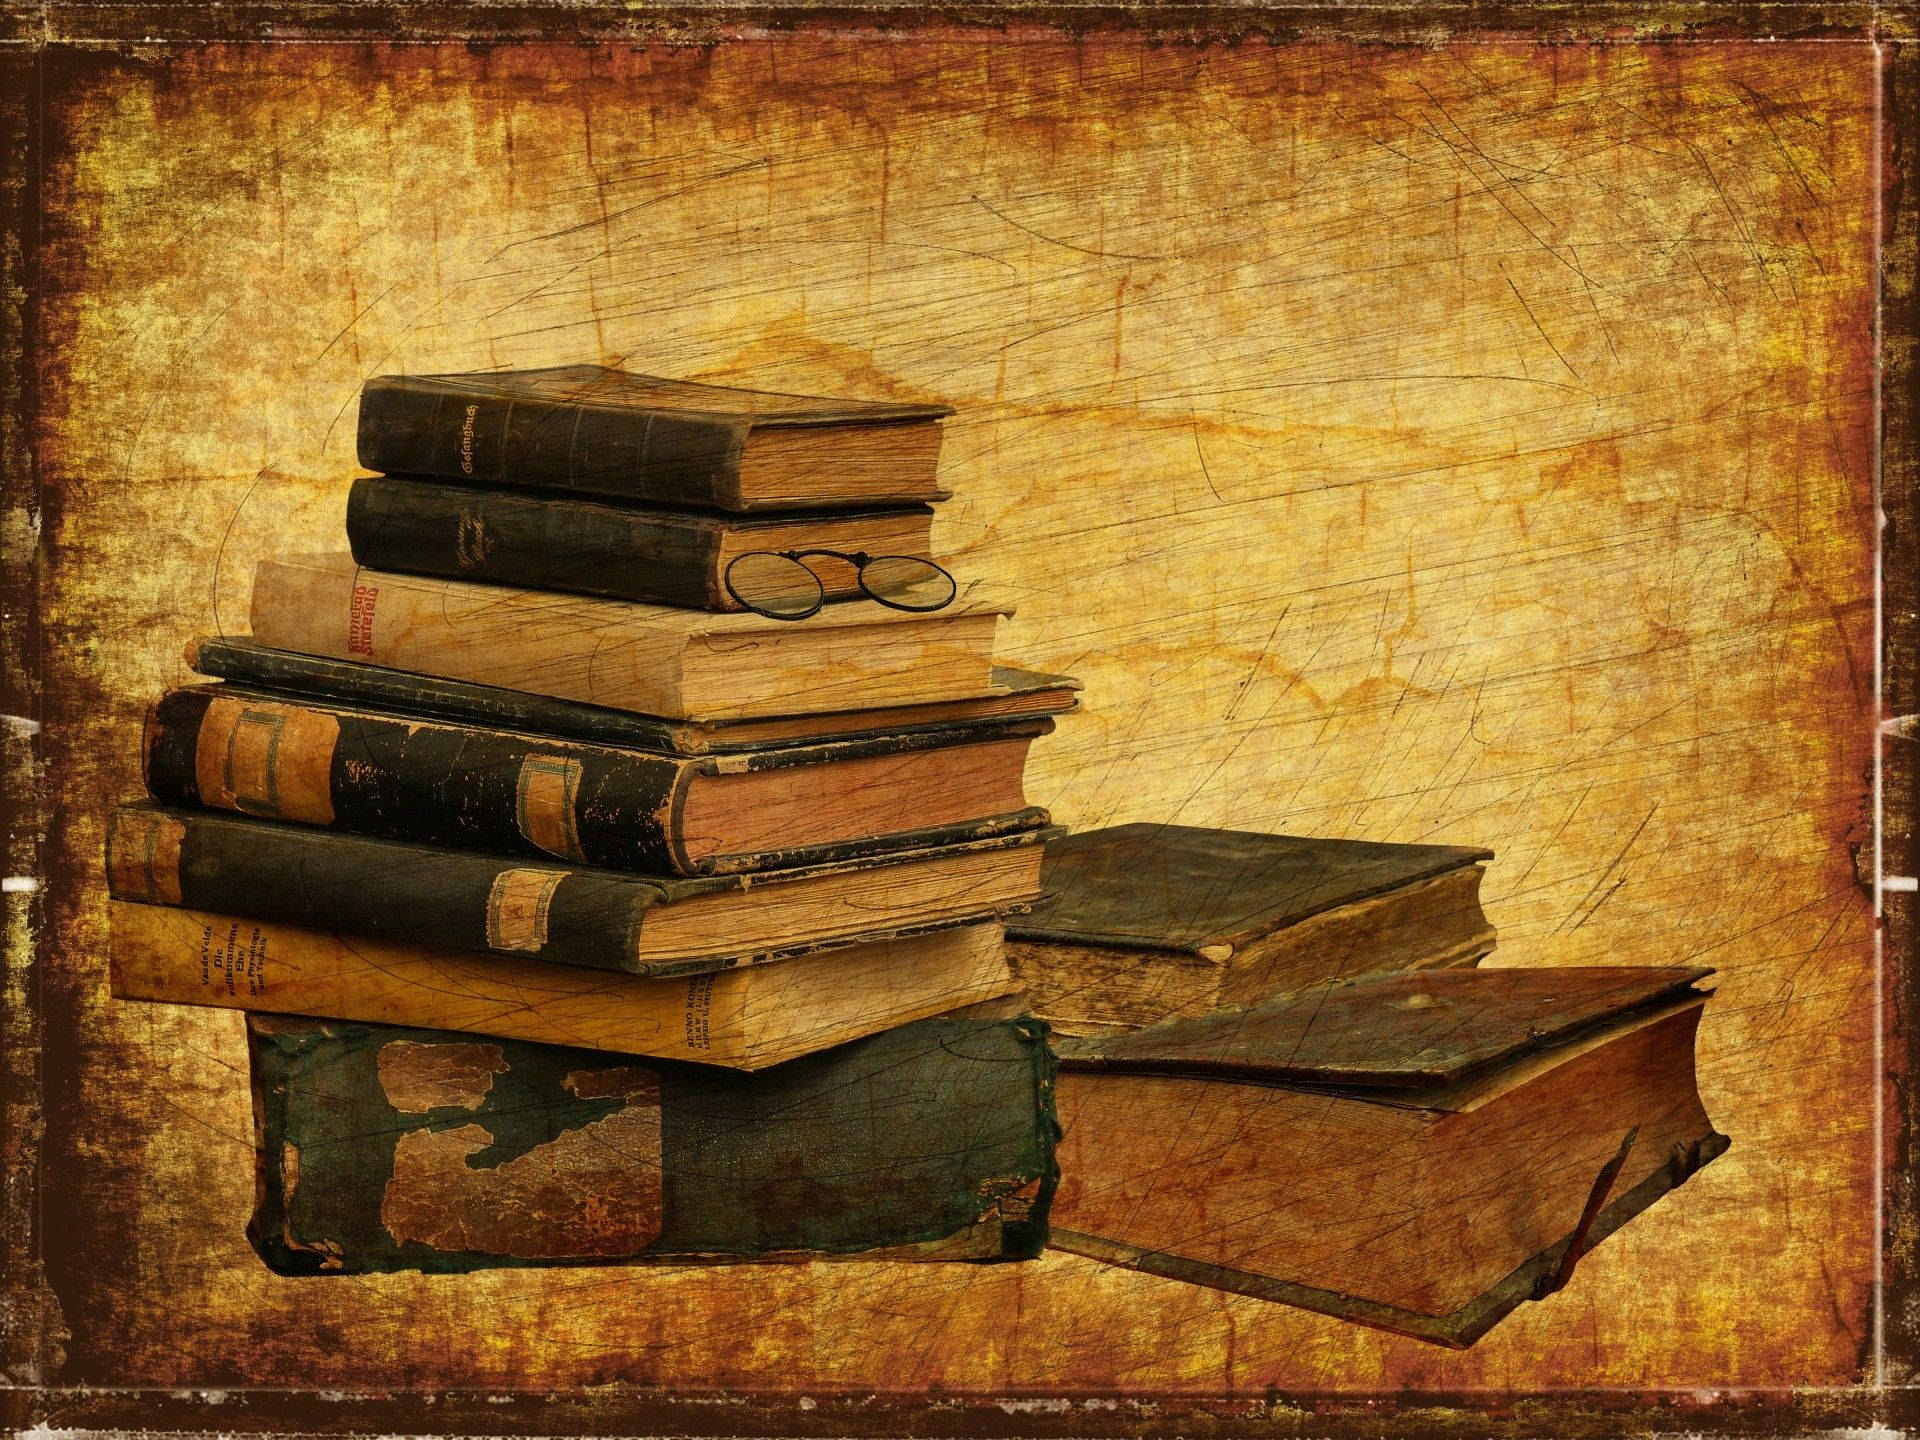 Aesthetic Old Books Stacked With Hard Book Cover Background